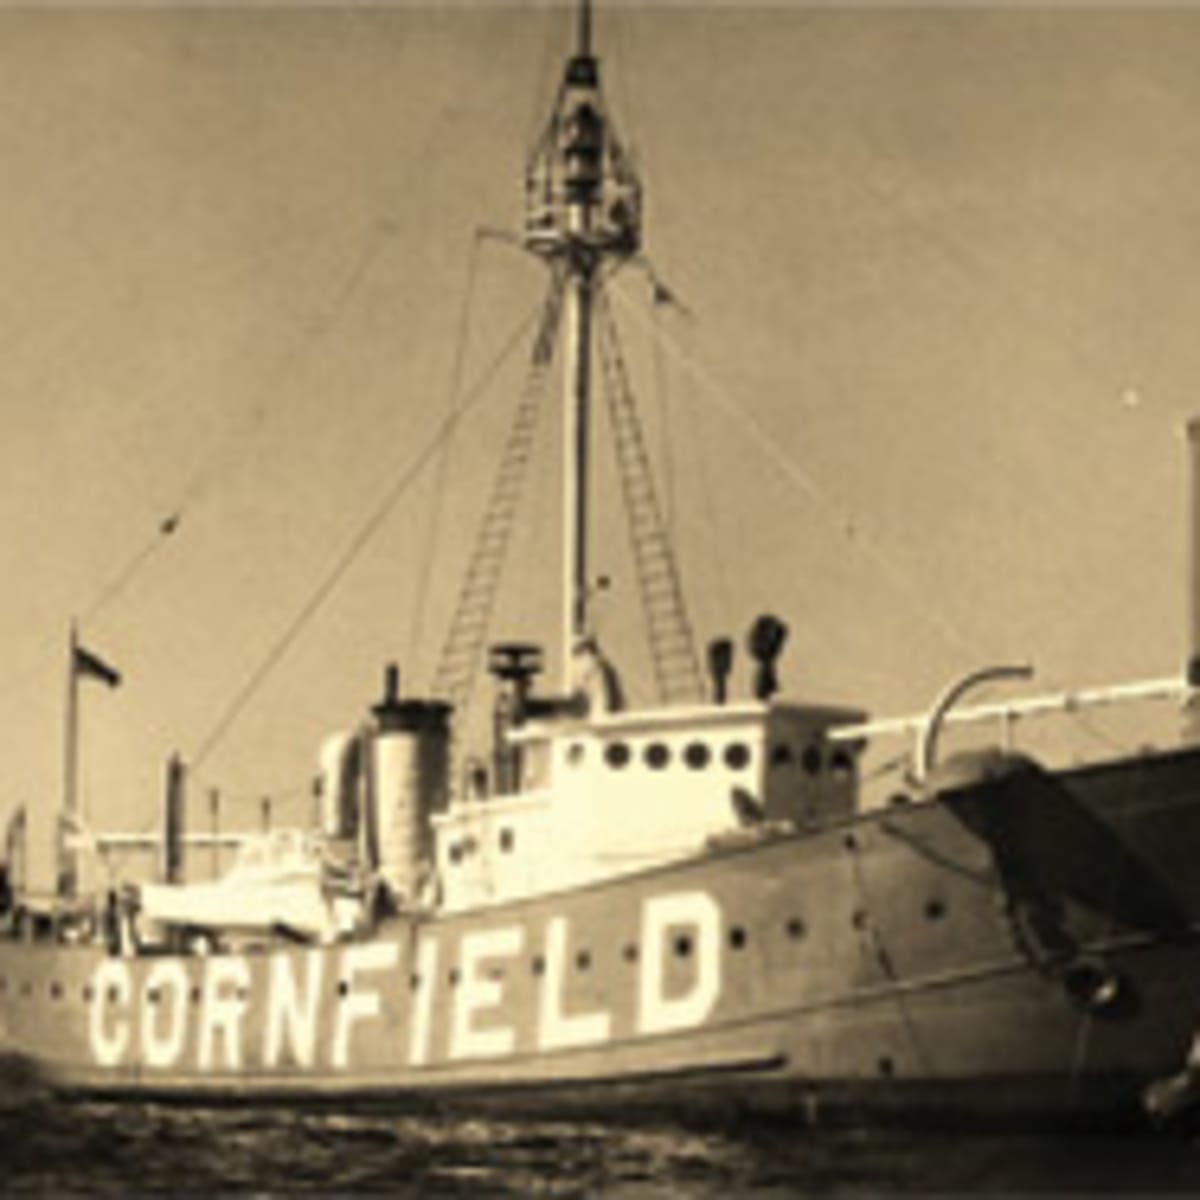 The Nantucket Lightship Collision with the RMS Olympic in Massachusetts